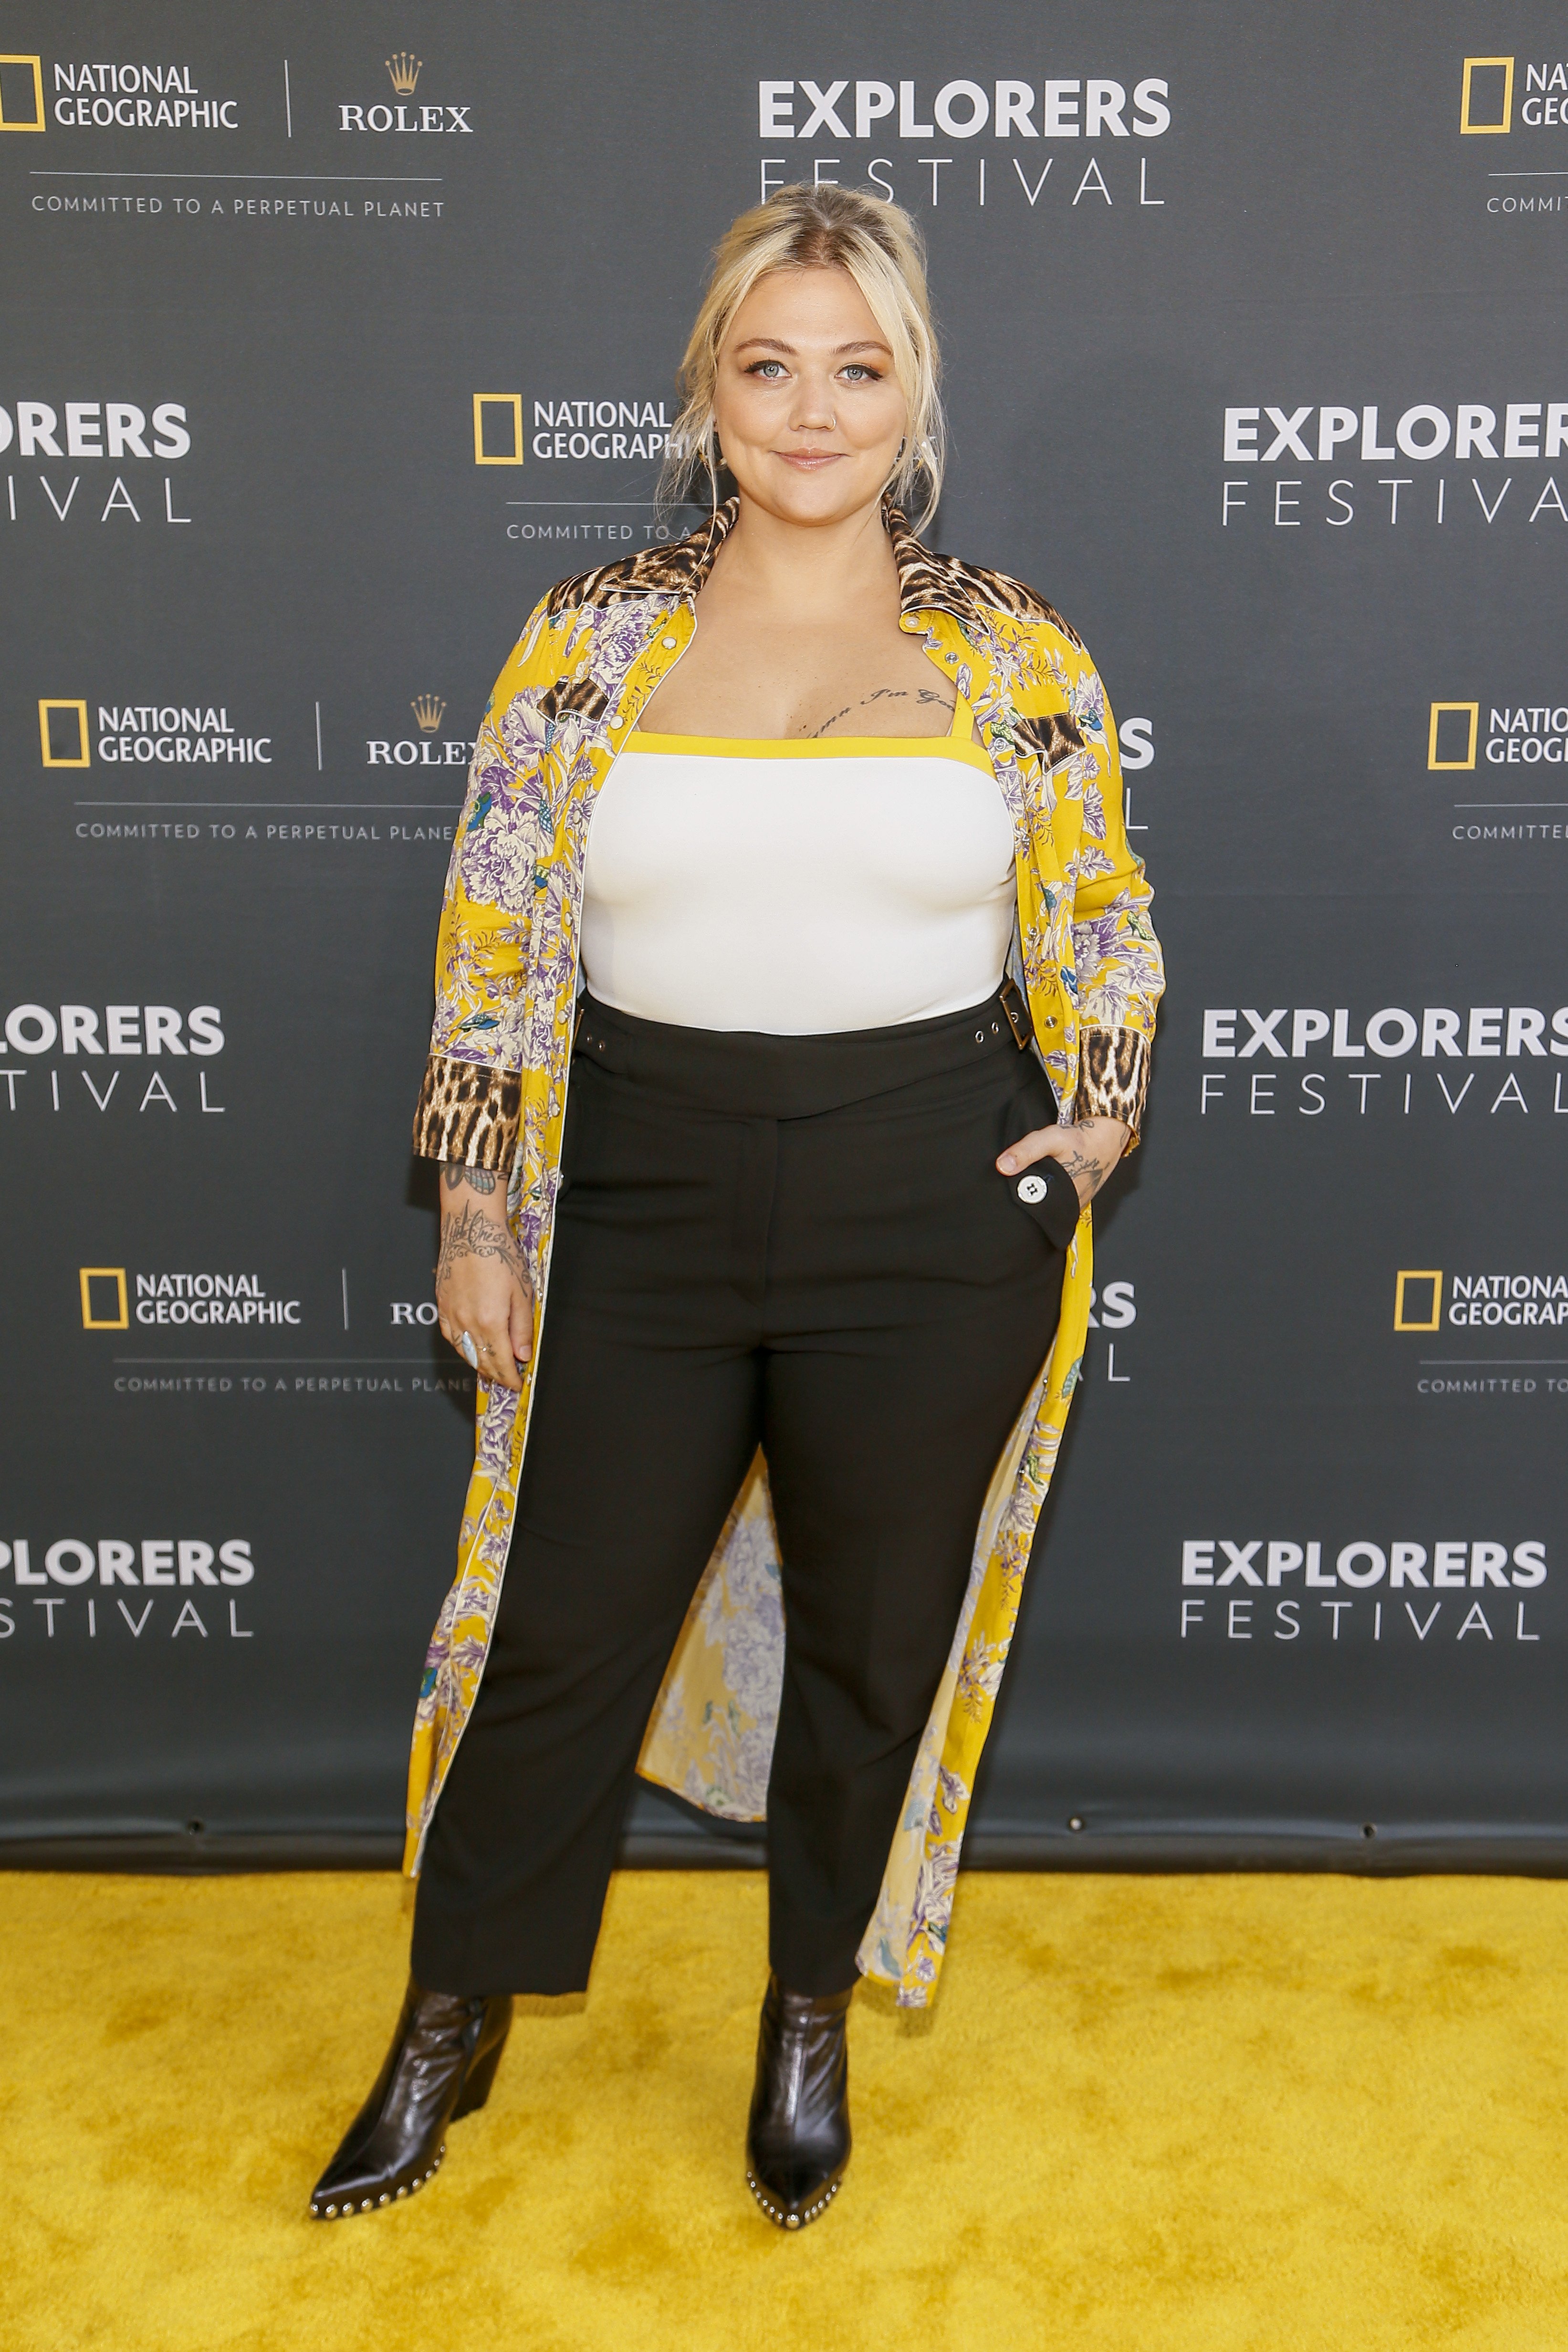  Elle King at the National Geographic Awards on Wednesday, June 12, 2019, at Lisner Auditorium in Washington, D.C. | Photo: Getty Images